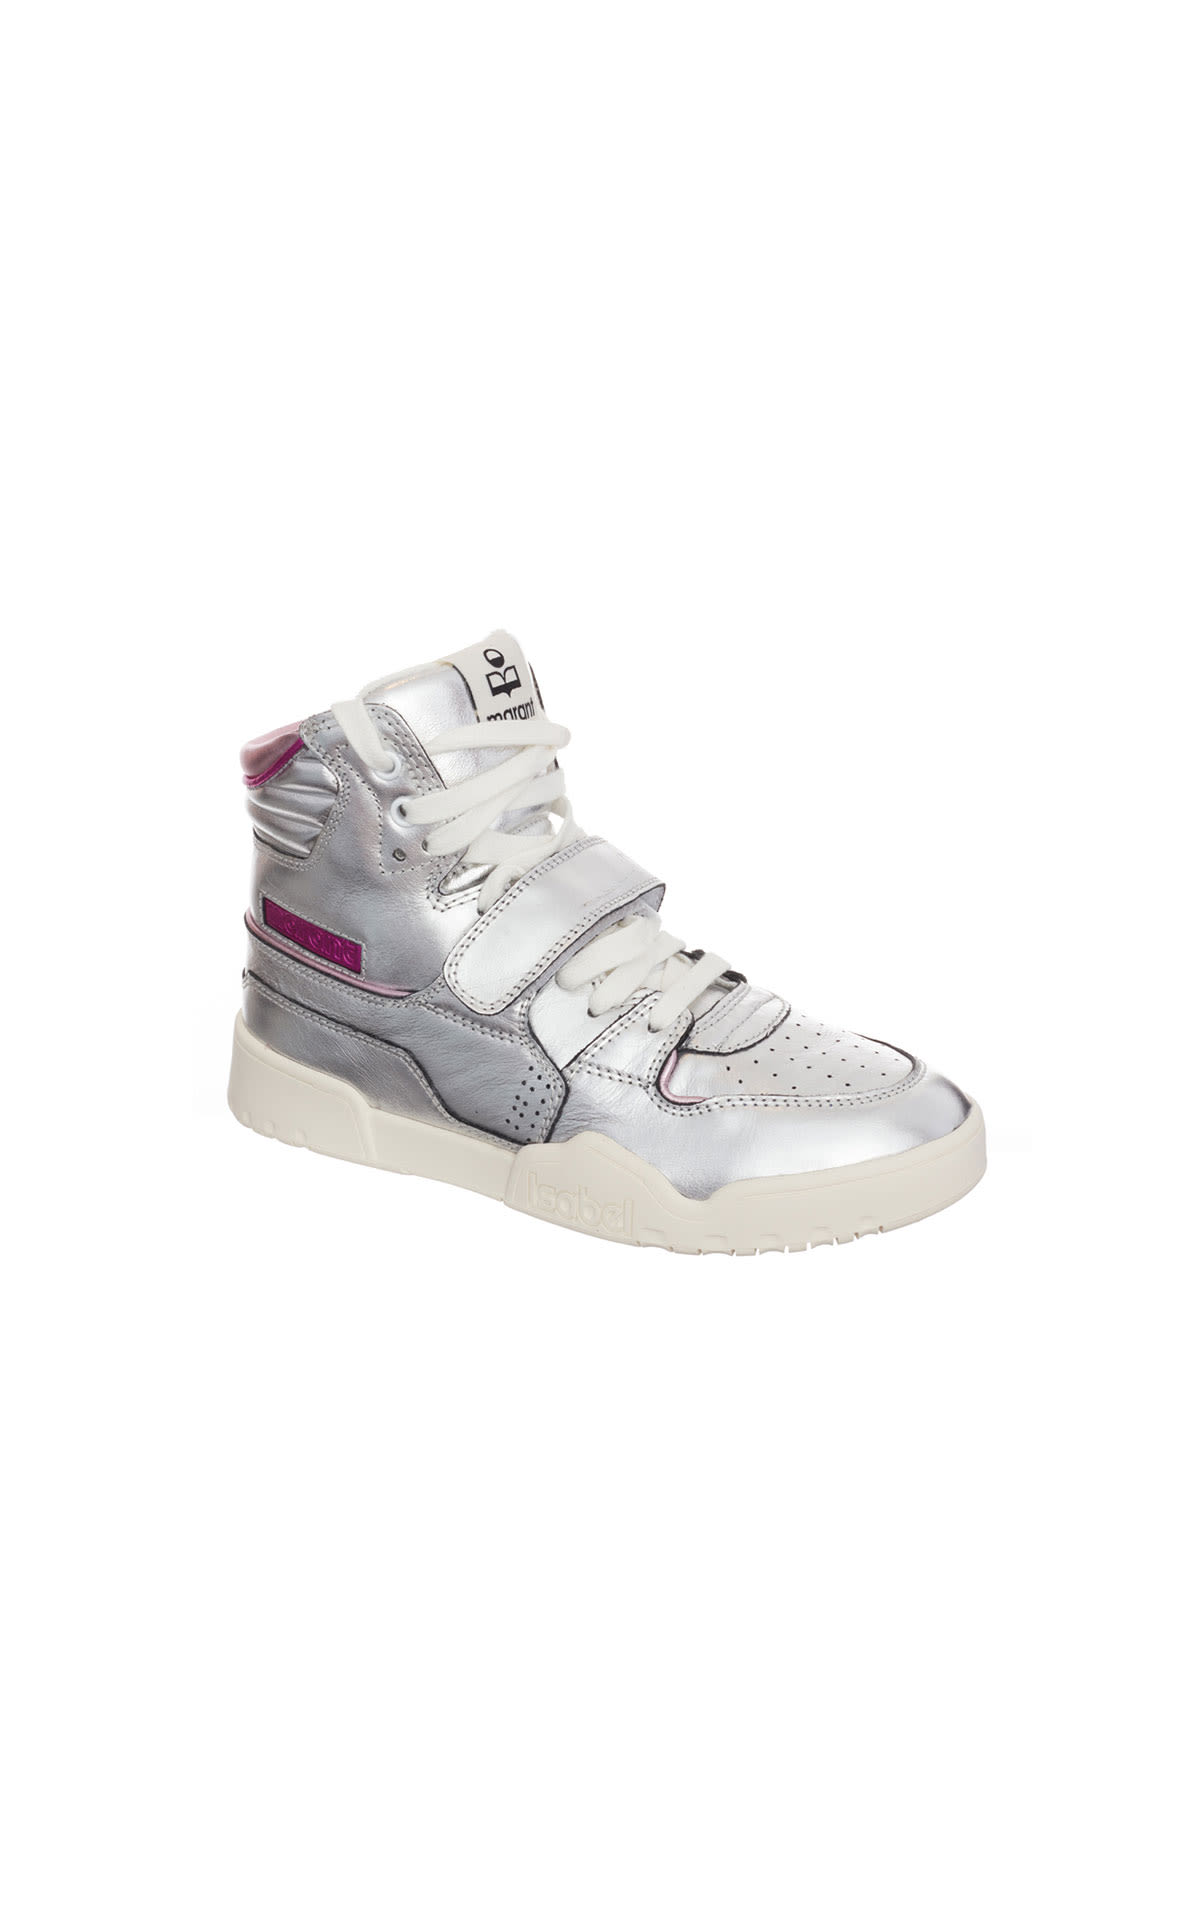 Isabel Marant Alsee sneakers from Bicester Village